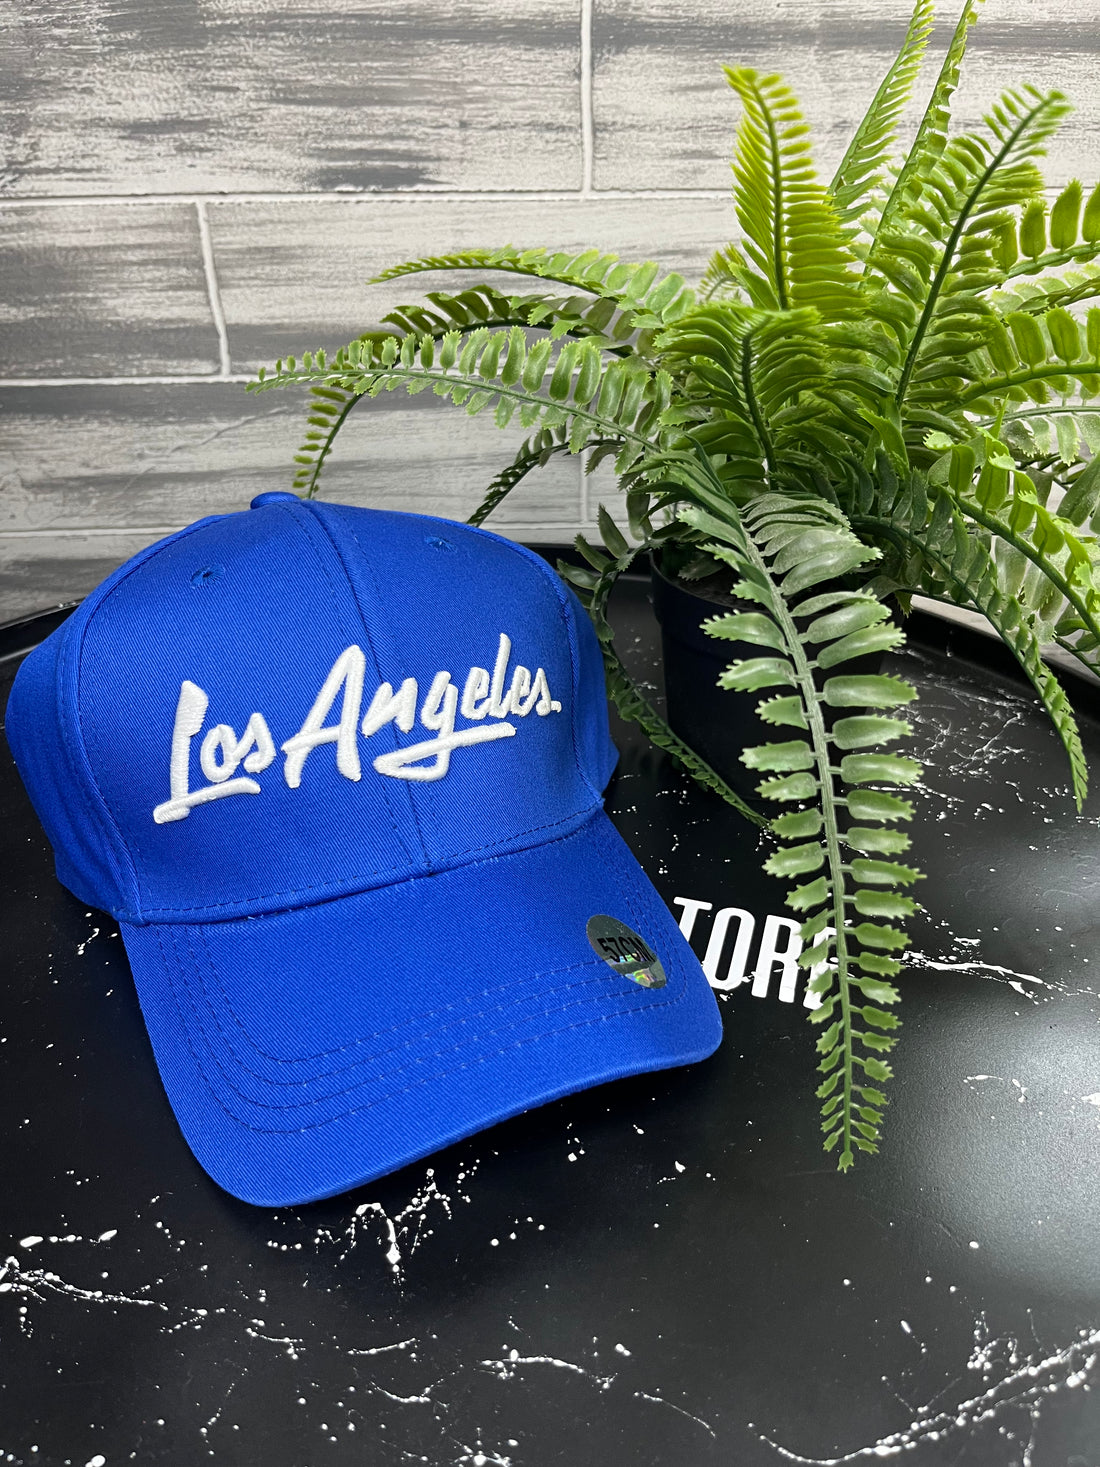 Casquette Los Angeles Bleue - Stayin